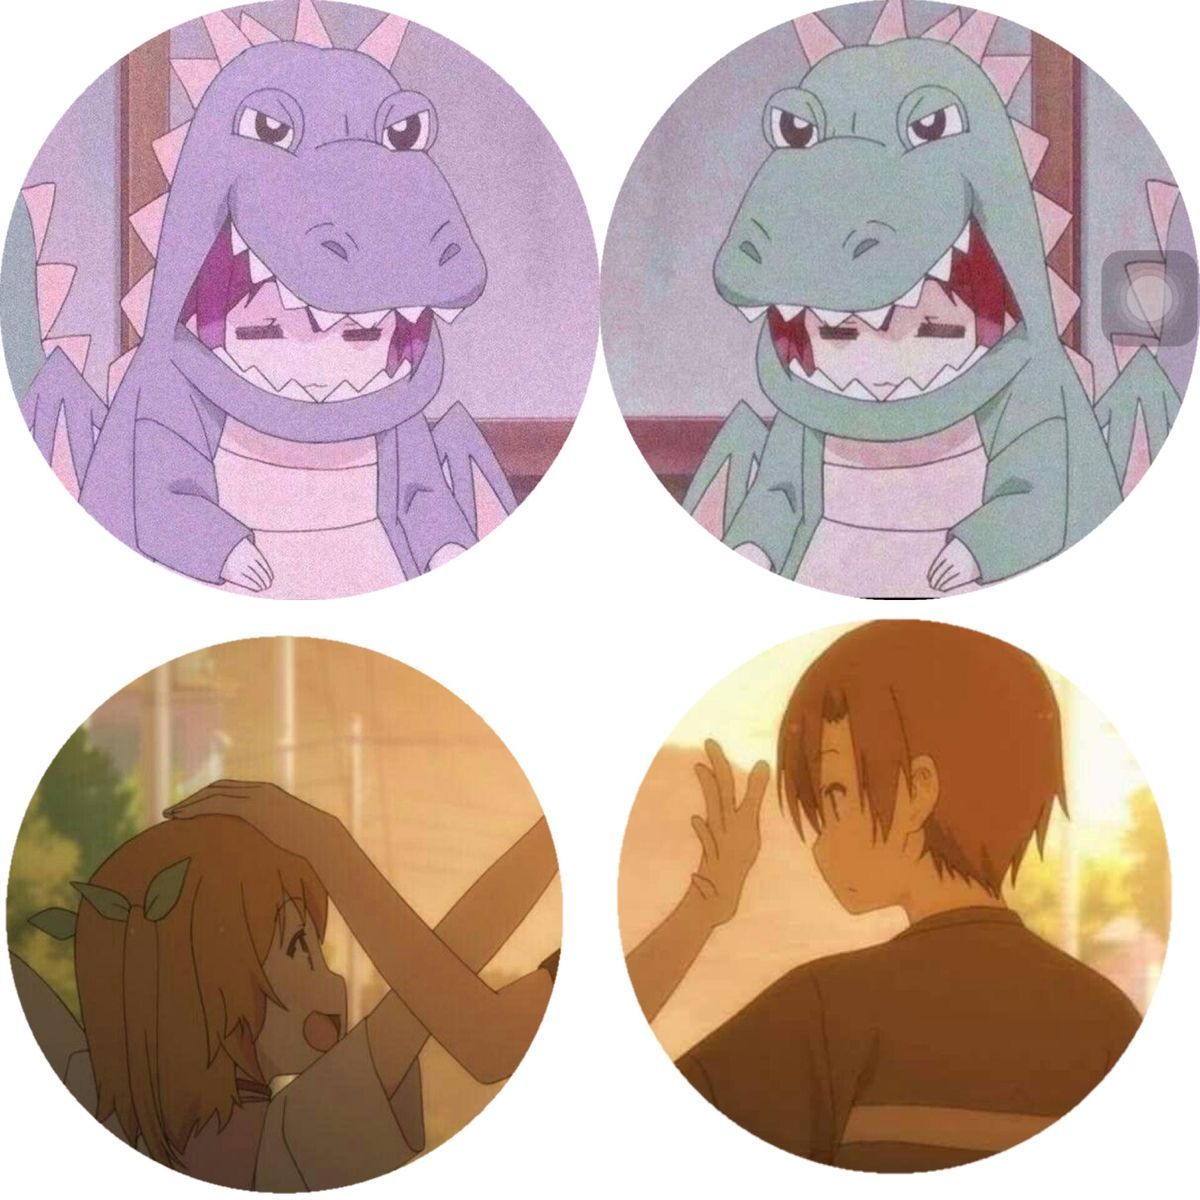 Friendship Aesthetic Anime Cute Matching Profile Picture For Best Friend